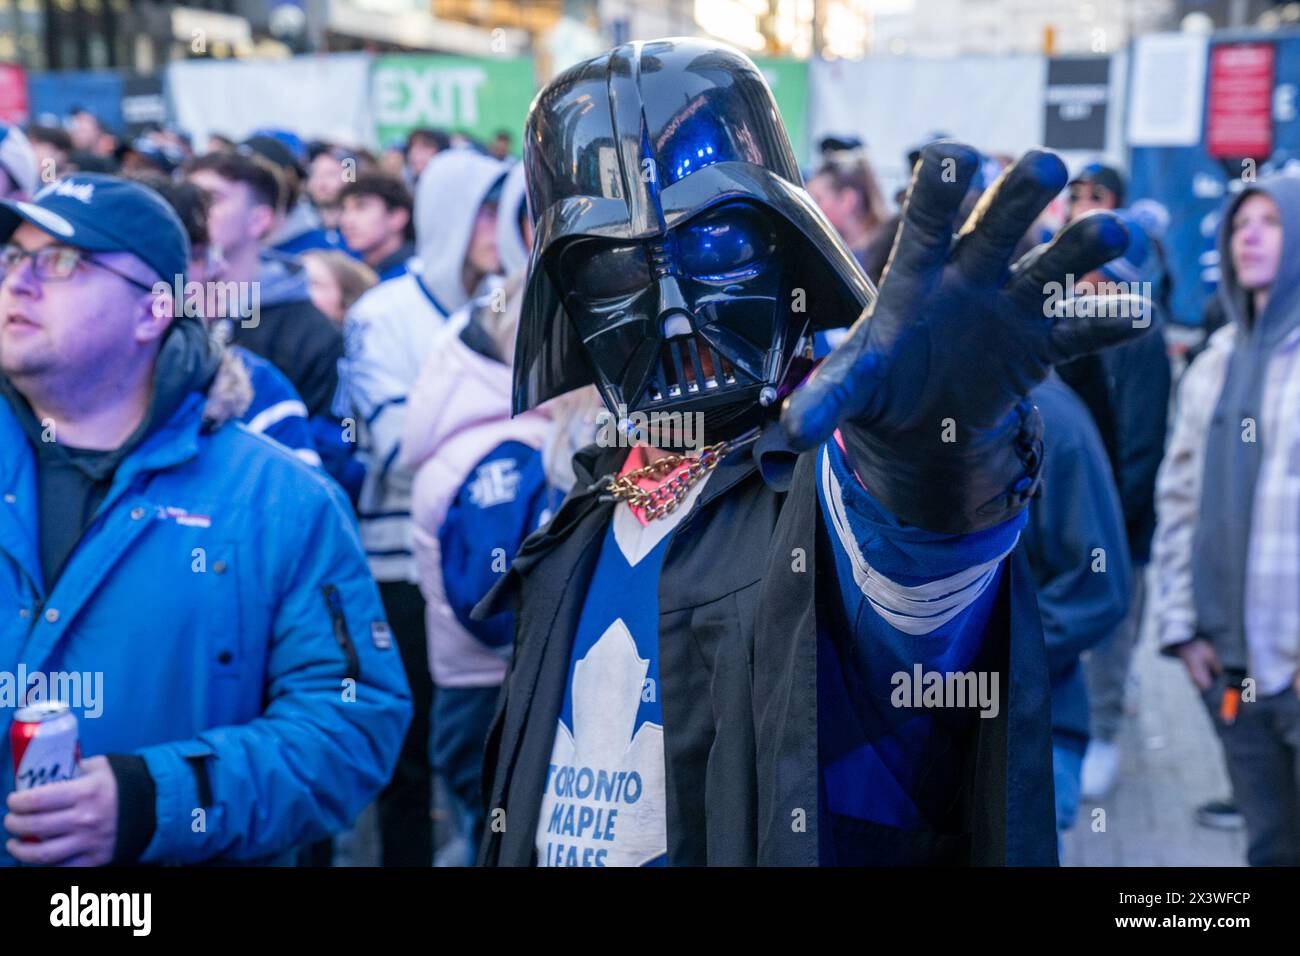 April 24, 2024, Toronto, Ontario, Canada: Fan dressed as Darth Vader at Maple Leaf Square outside Scotibank Arena, watching Round 1, Game 4 playoff game of Toronto Maple Leafs vs Boston Bruins playoff game on a giant screen. During Toronto Maple Leafs playoff games, Maple Leaf Square transforms into a sea of blue and white, echoing with the chants of passionate fans eagerly rallying behind their team's quest for victory. The electric atmosphere radiates anticipation and excitement, creating unforgettable memories for both die-hard supporters and casual observers alike. (Credit Image: © Shawn G Stock Photo